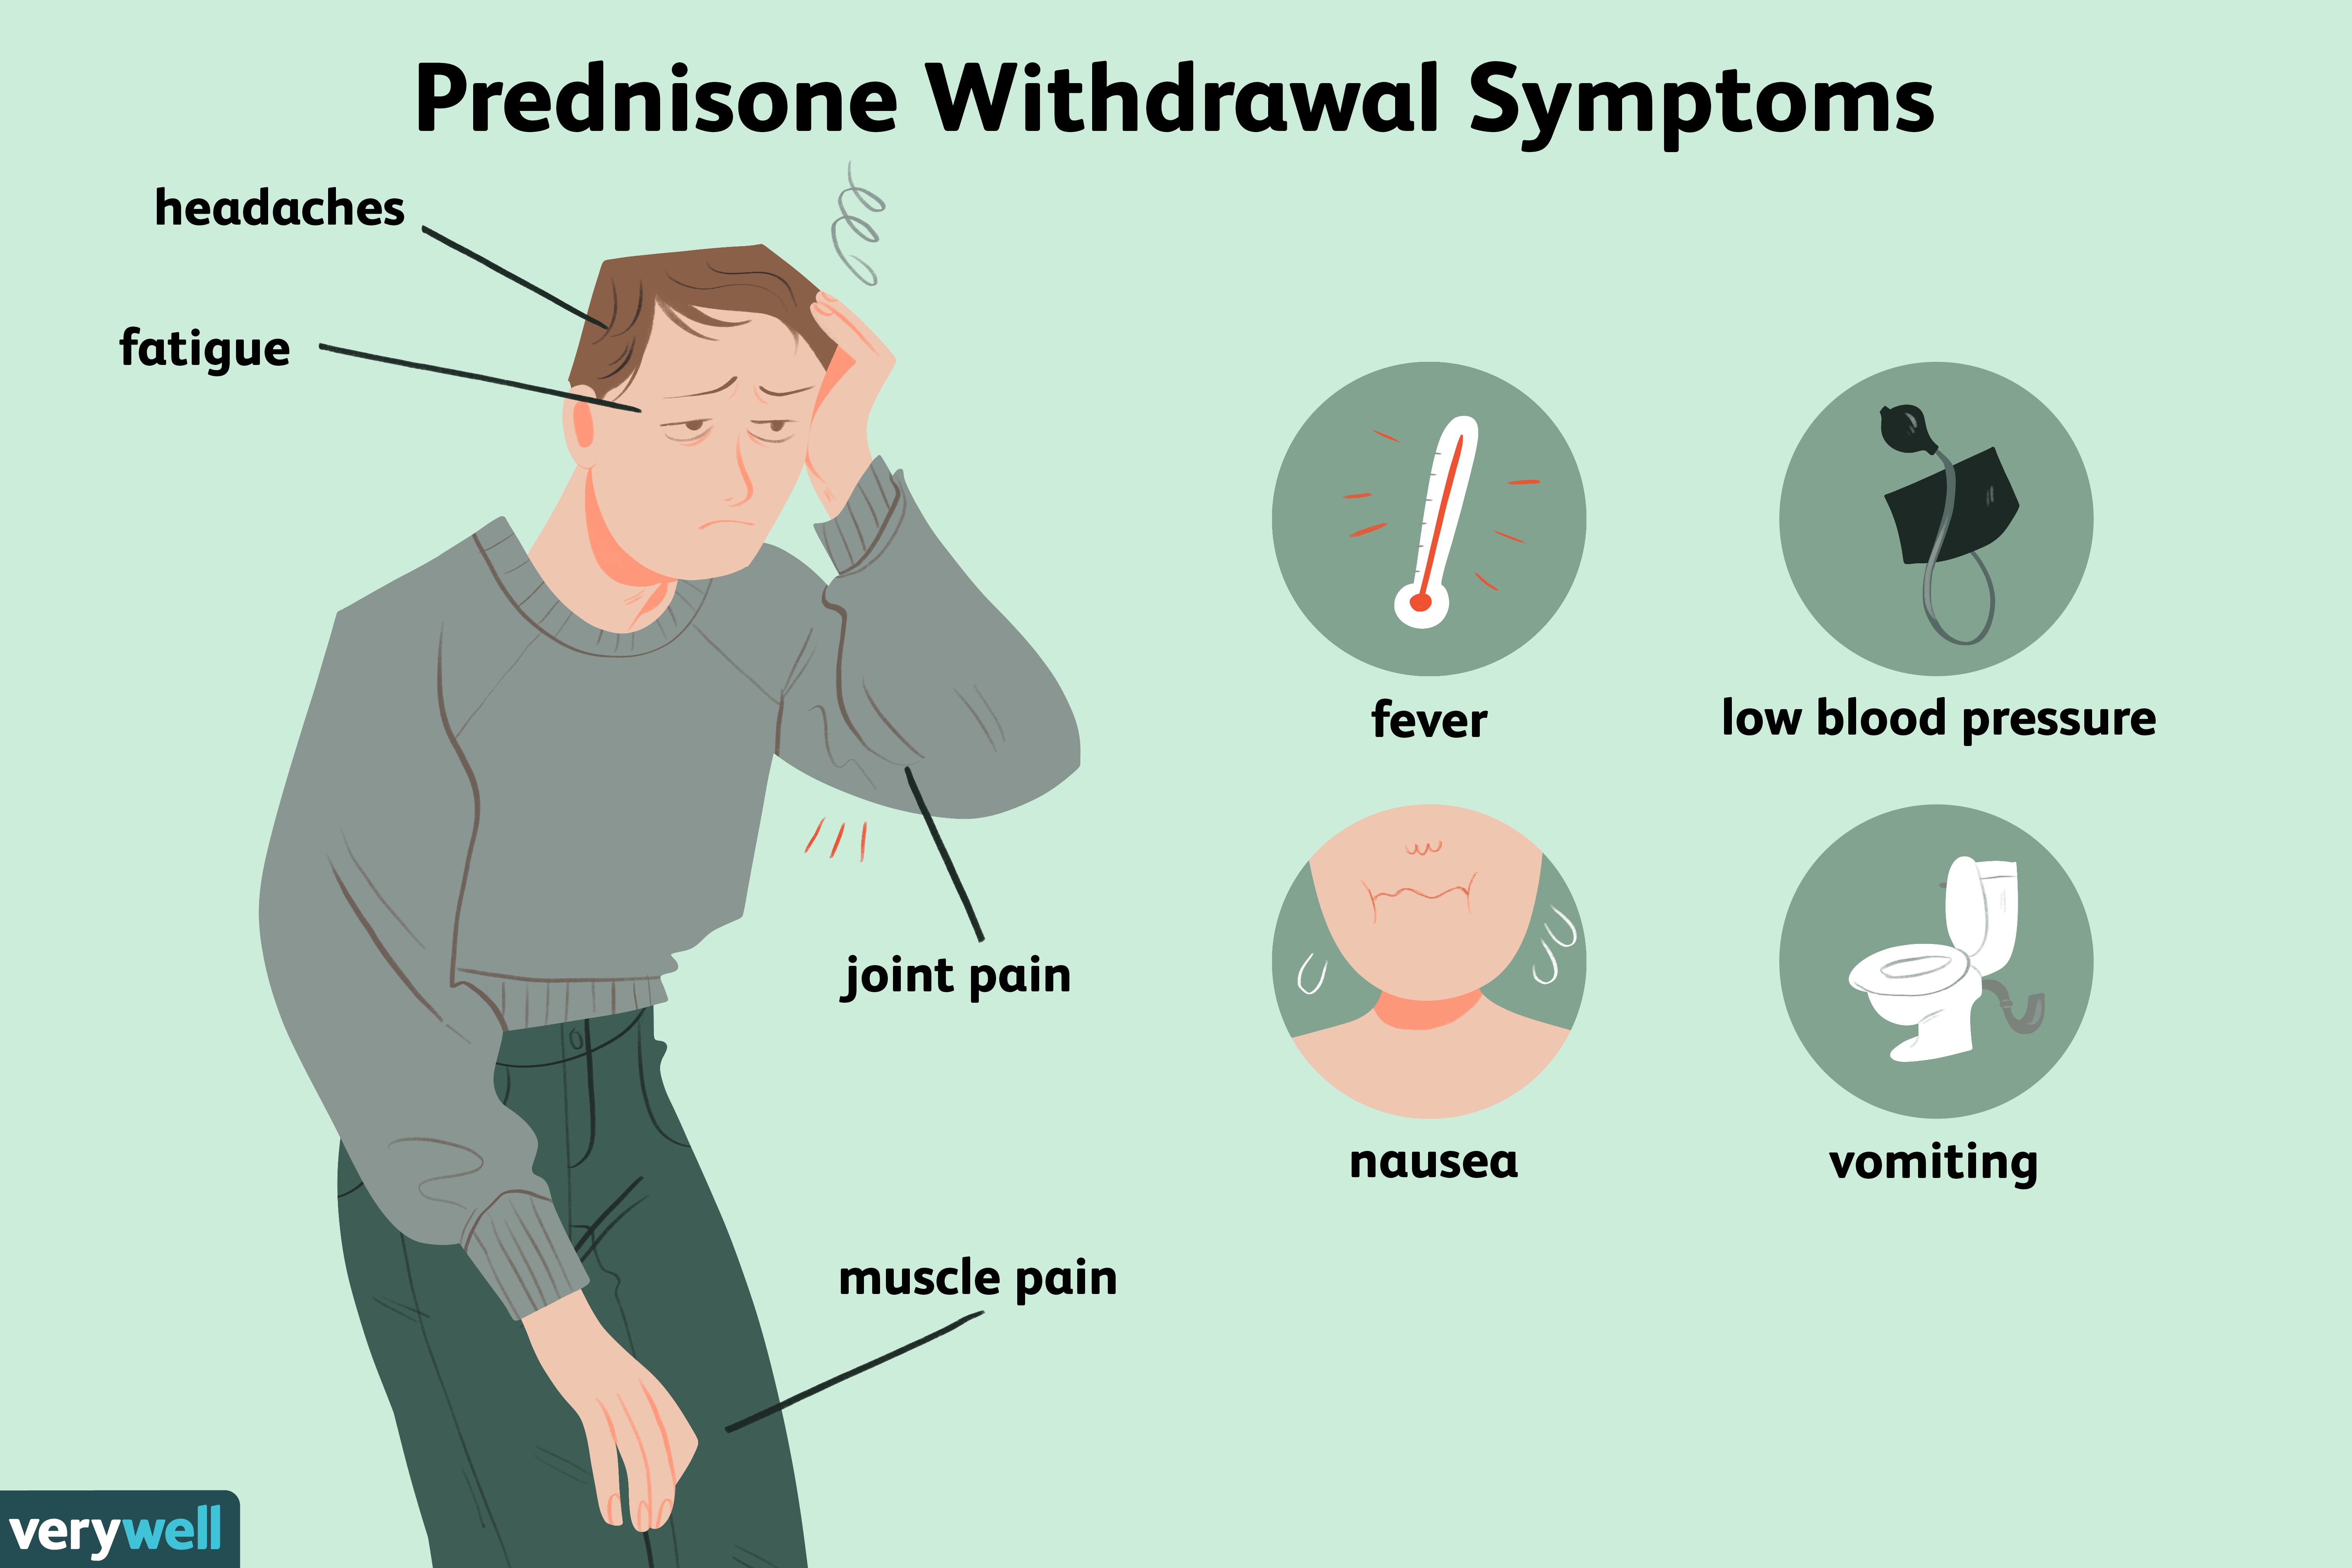 Prednisone Tapering Schedule to Reduce Withdrawal